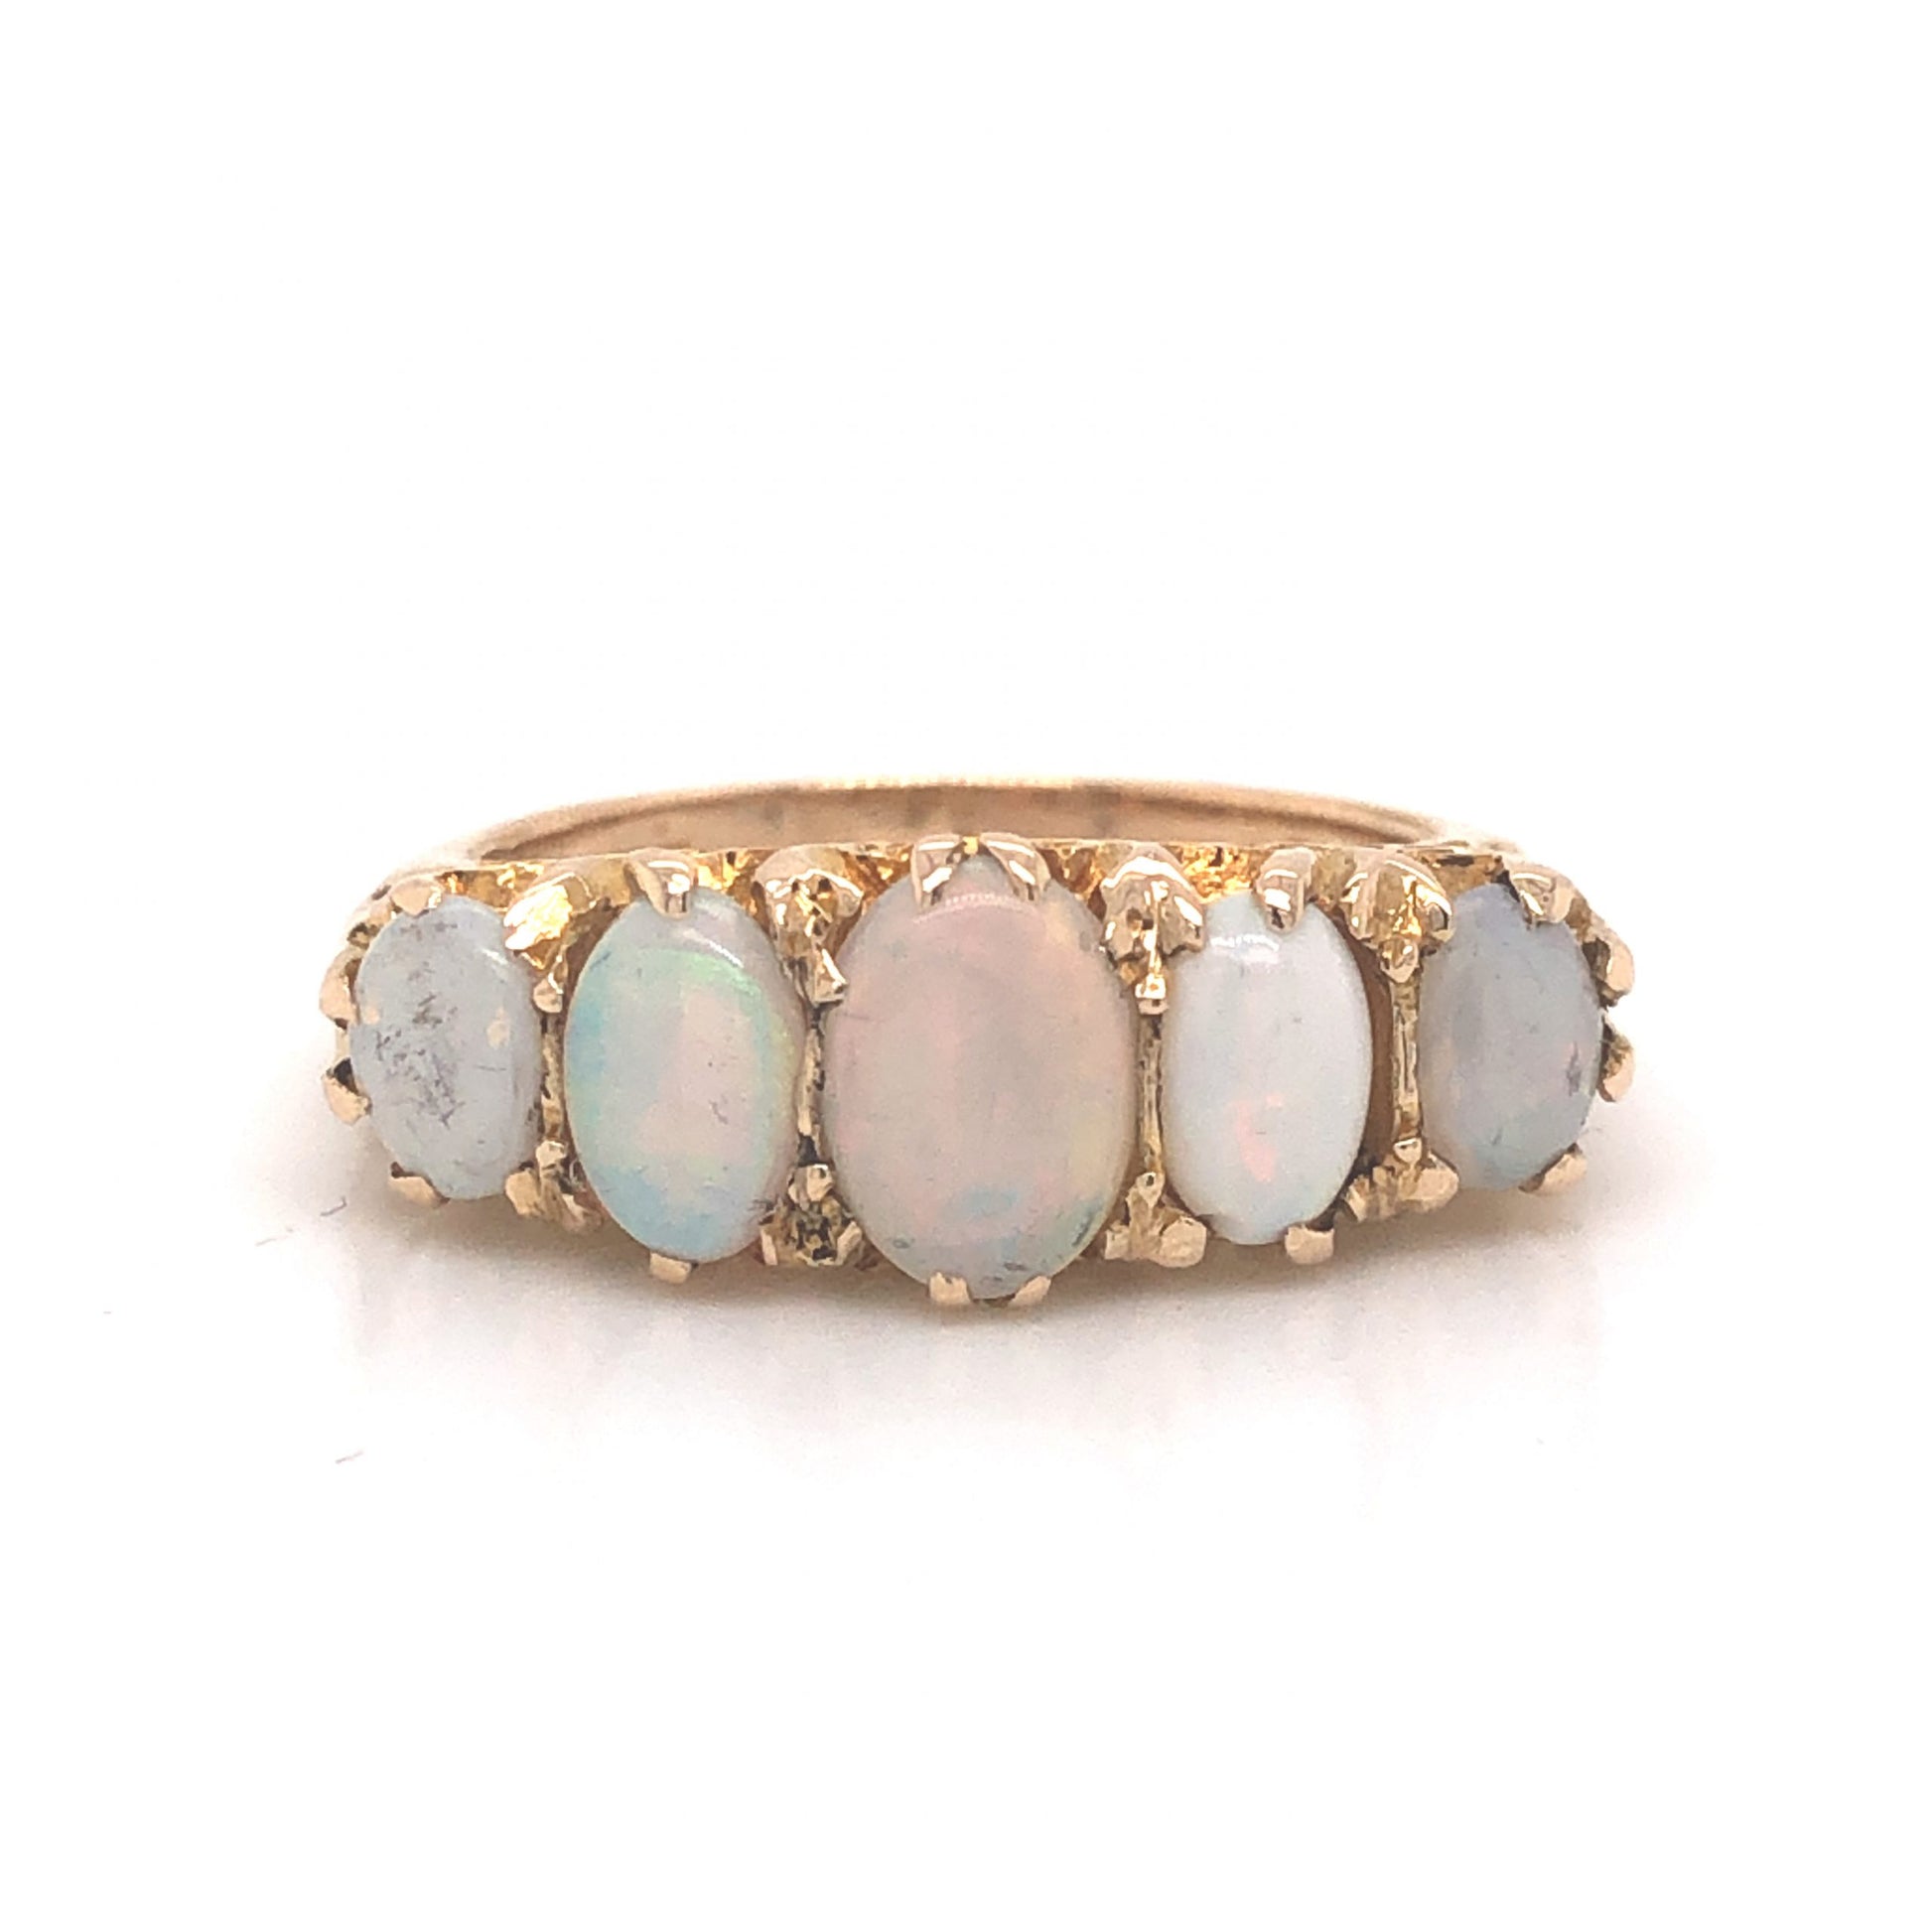 Ornate Victorian Opal Cocktail Ring in 14k Yellow GoldComposition: 14 Karat Yellow Gold Ring Size: 5.75 Total Gram Weight: 5.0 g Inscription: DHJ 14 585
      